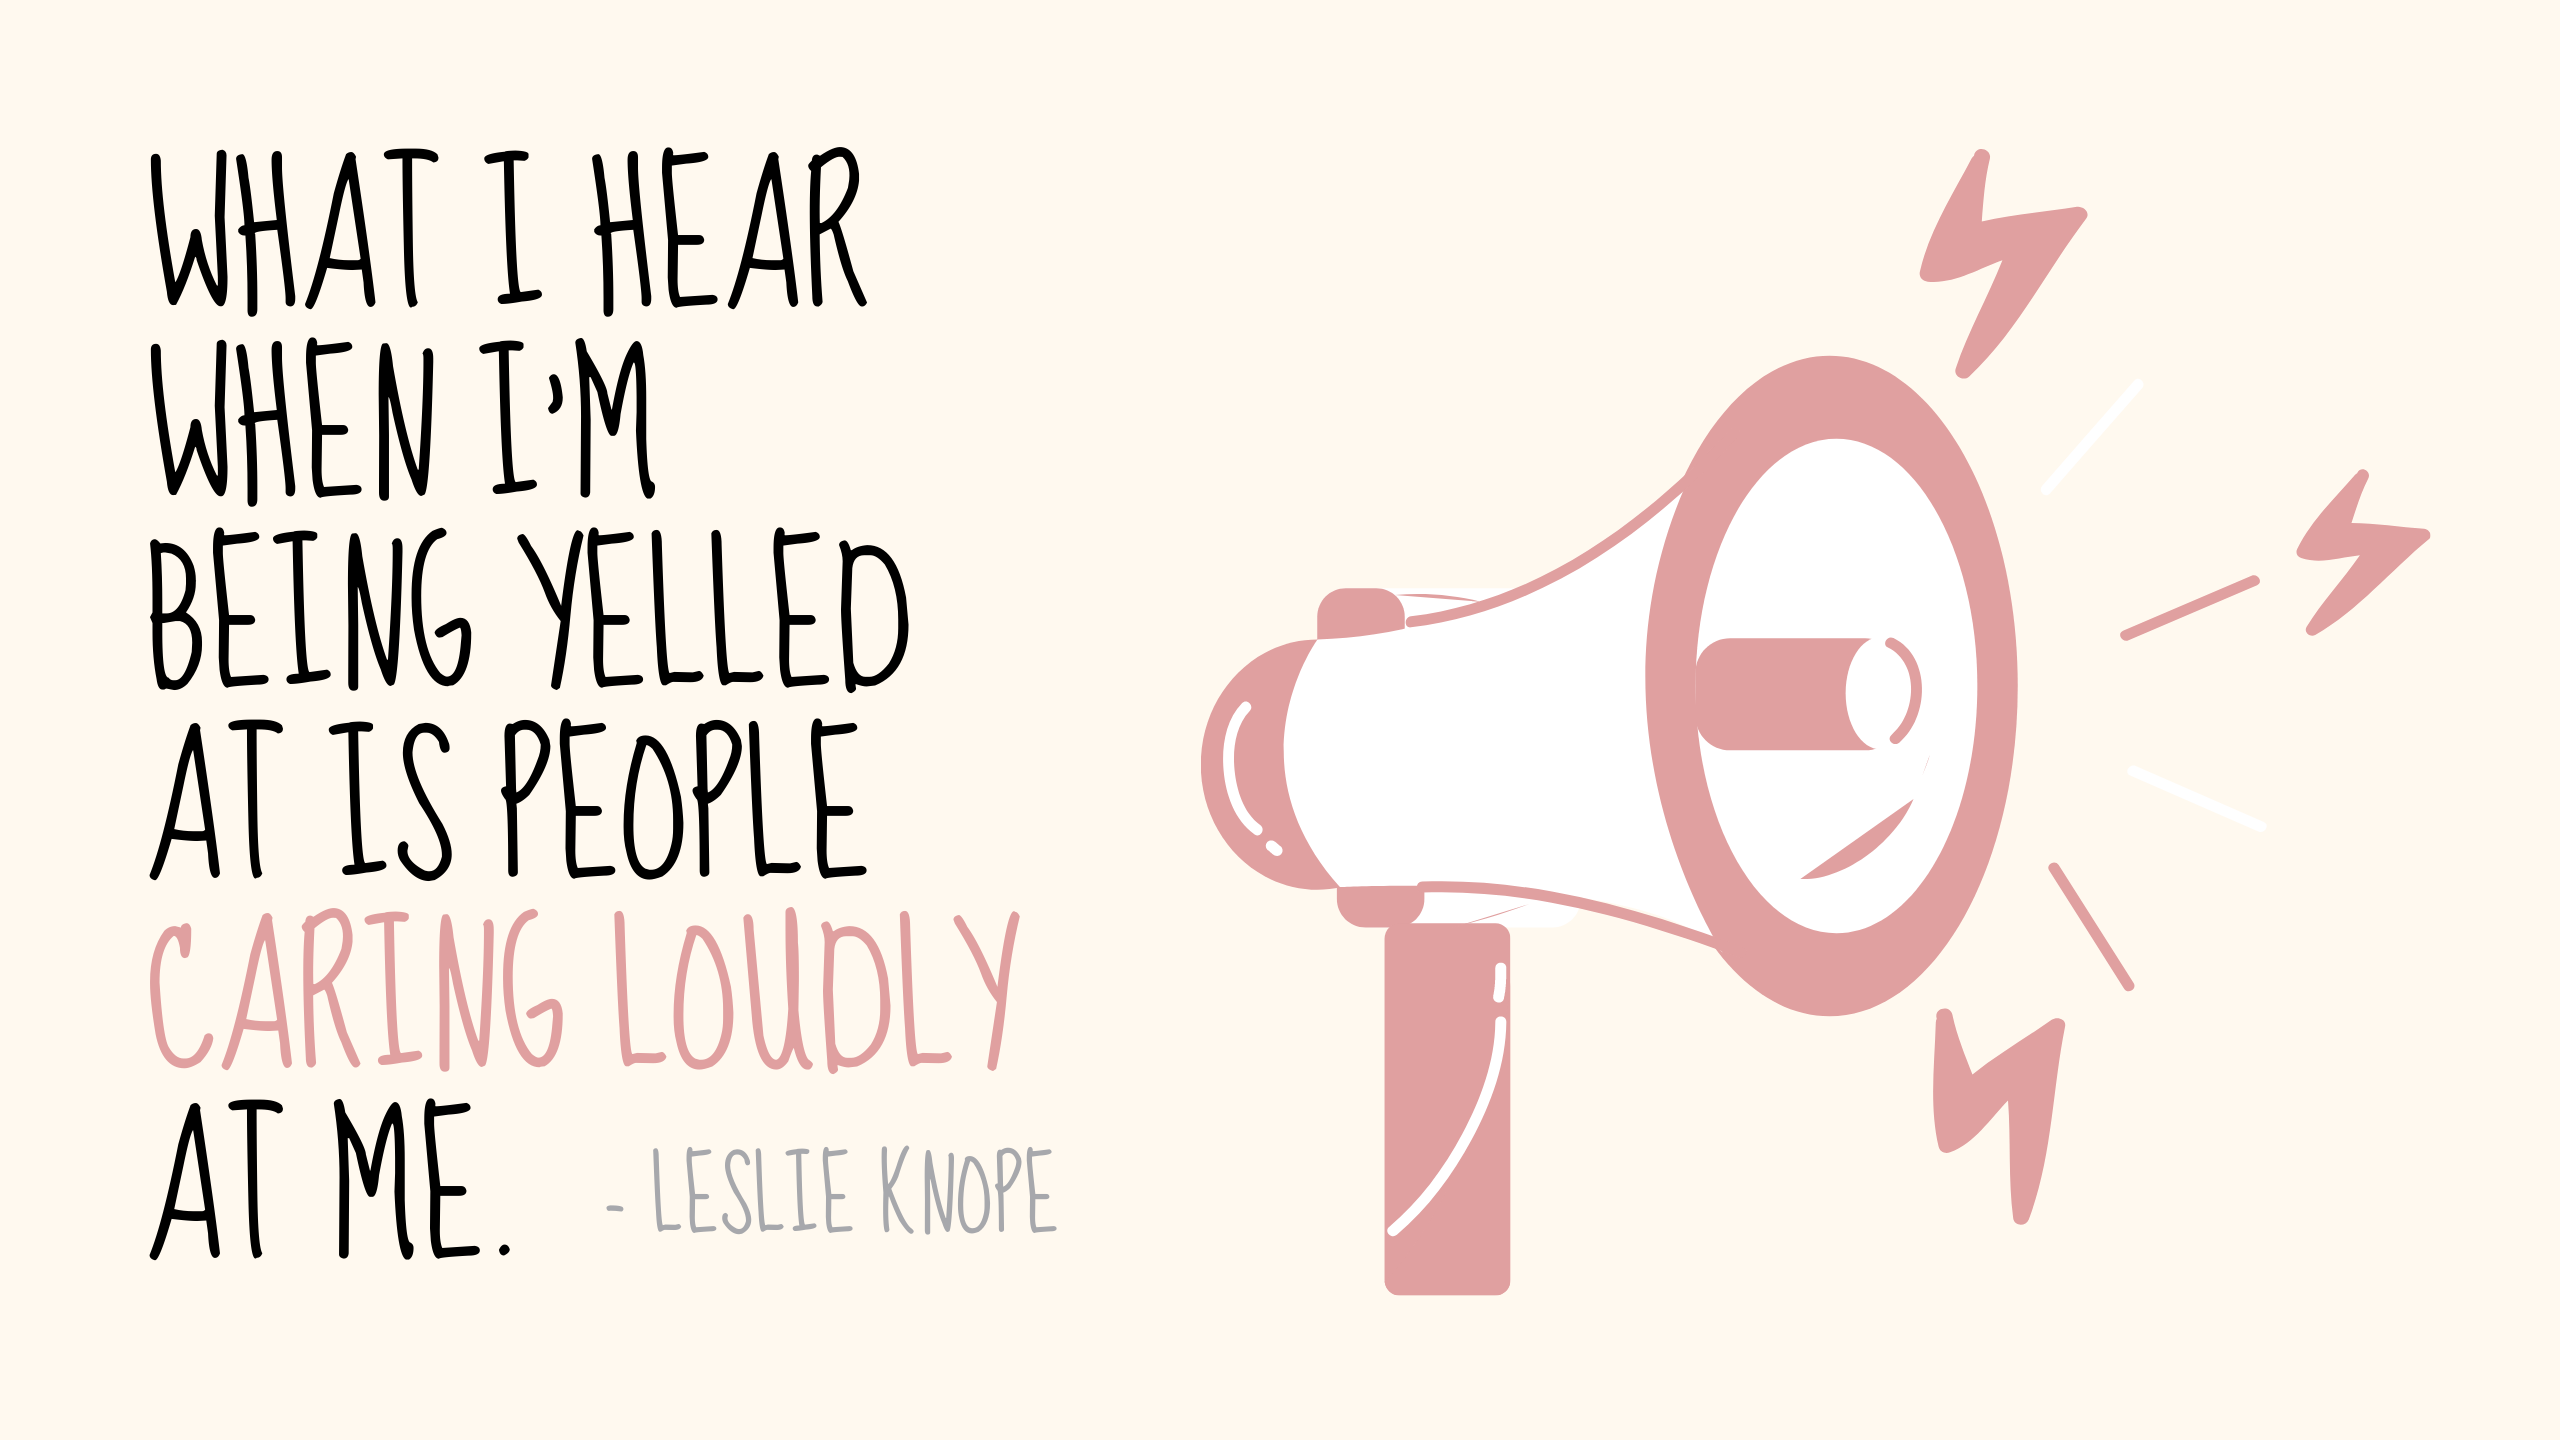 A drawing of a megaphone with the text "What I hear when I'm being yelled at is people caring loudly at me." in a handwritten font